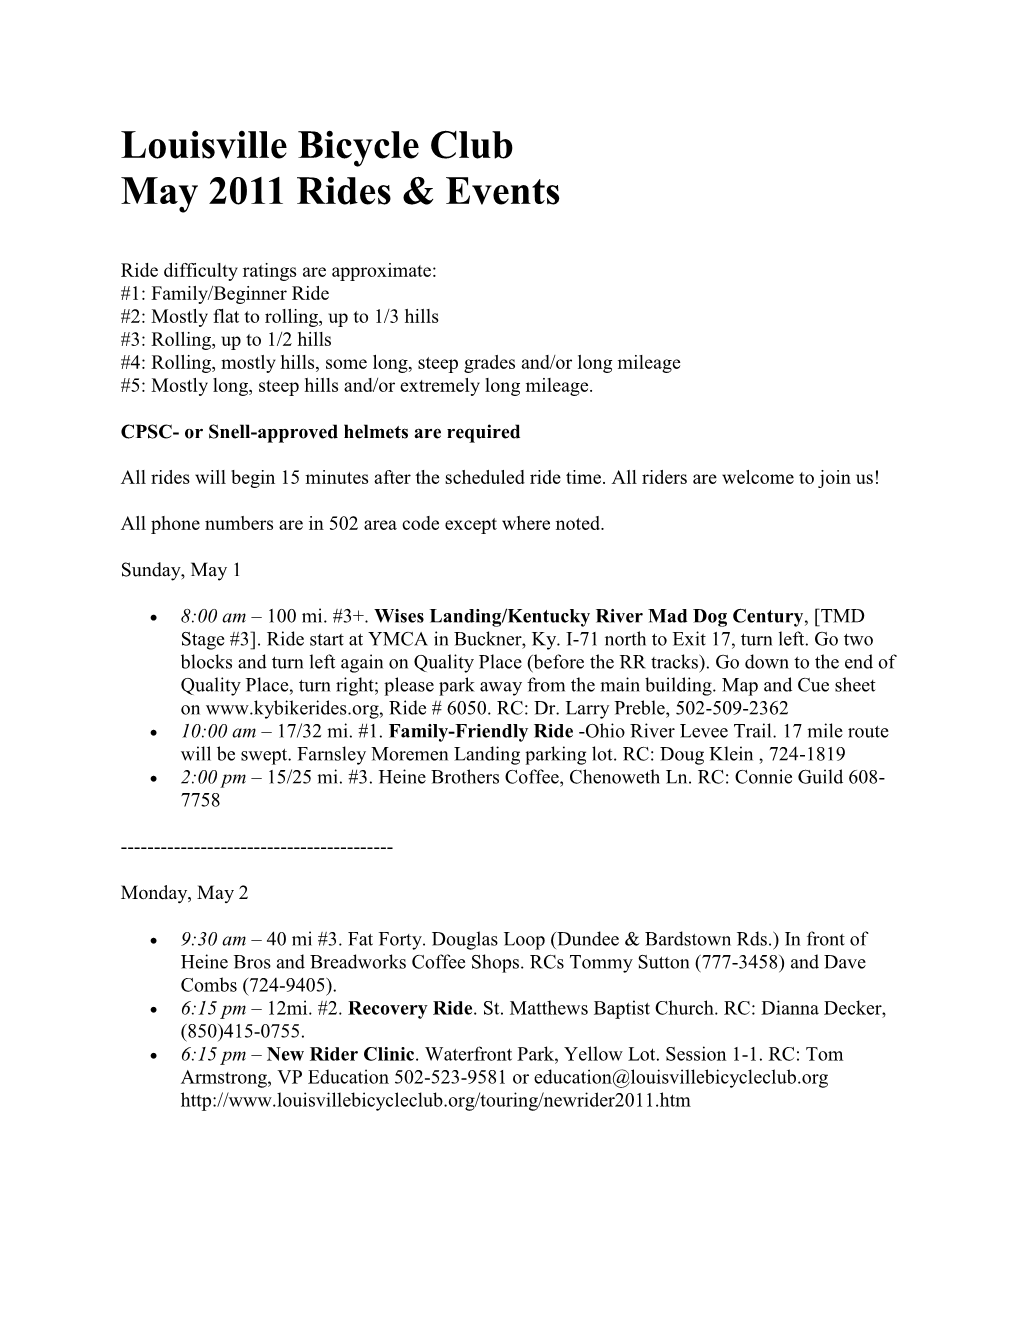 Louisville Bicycle Club May 2011 Rides & Events